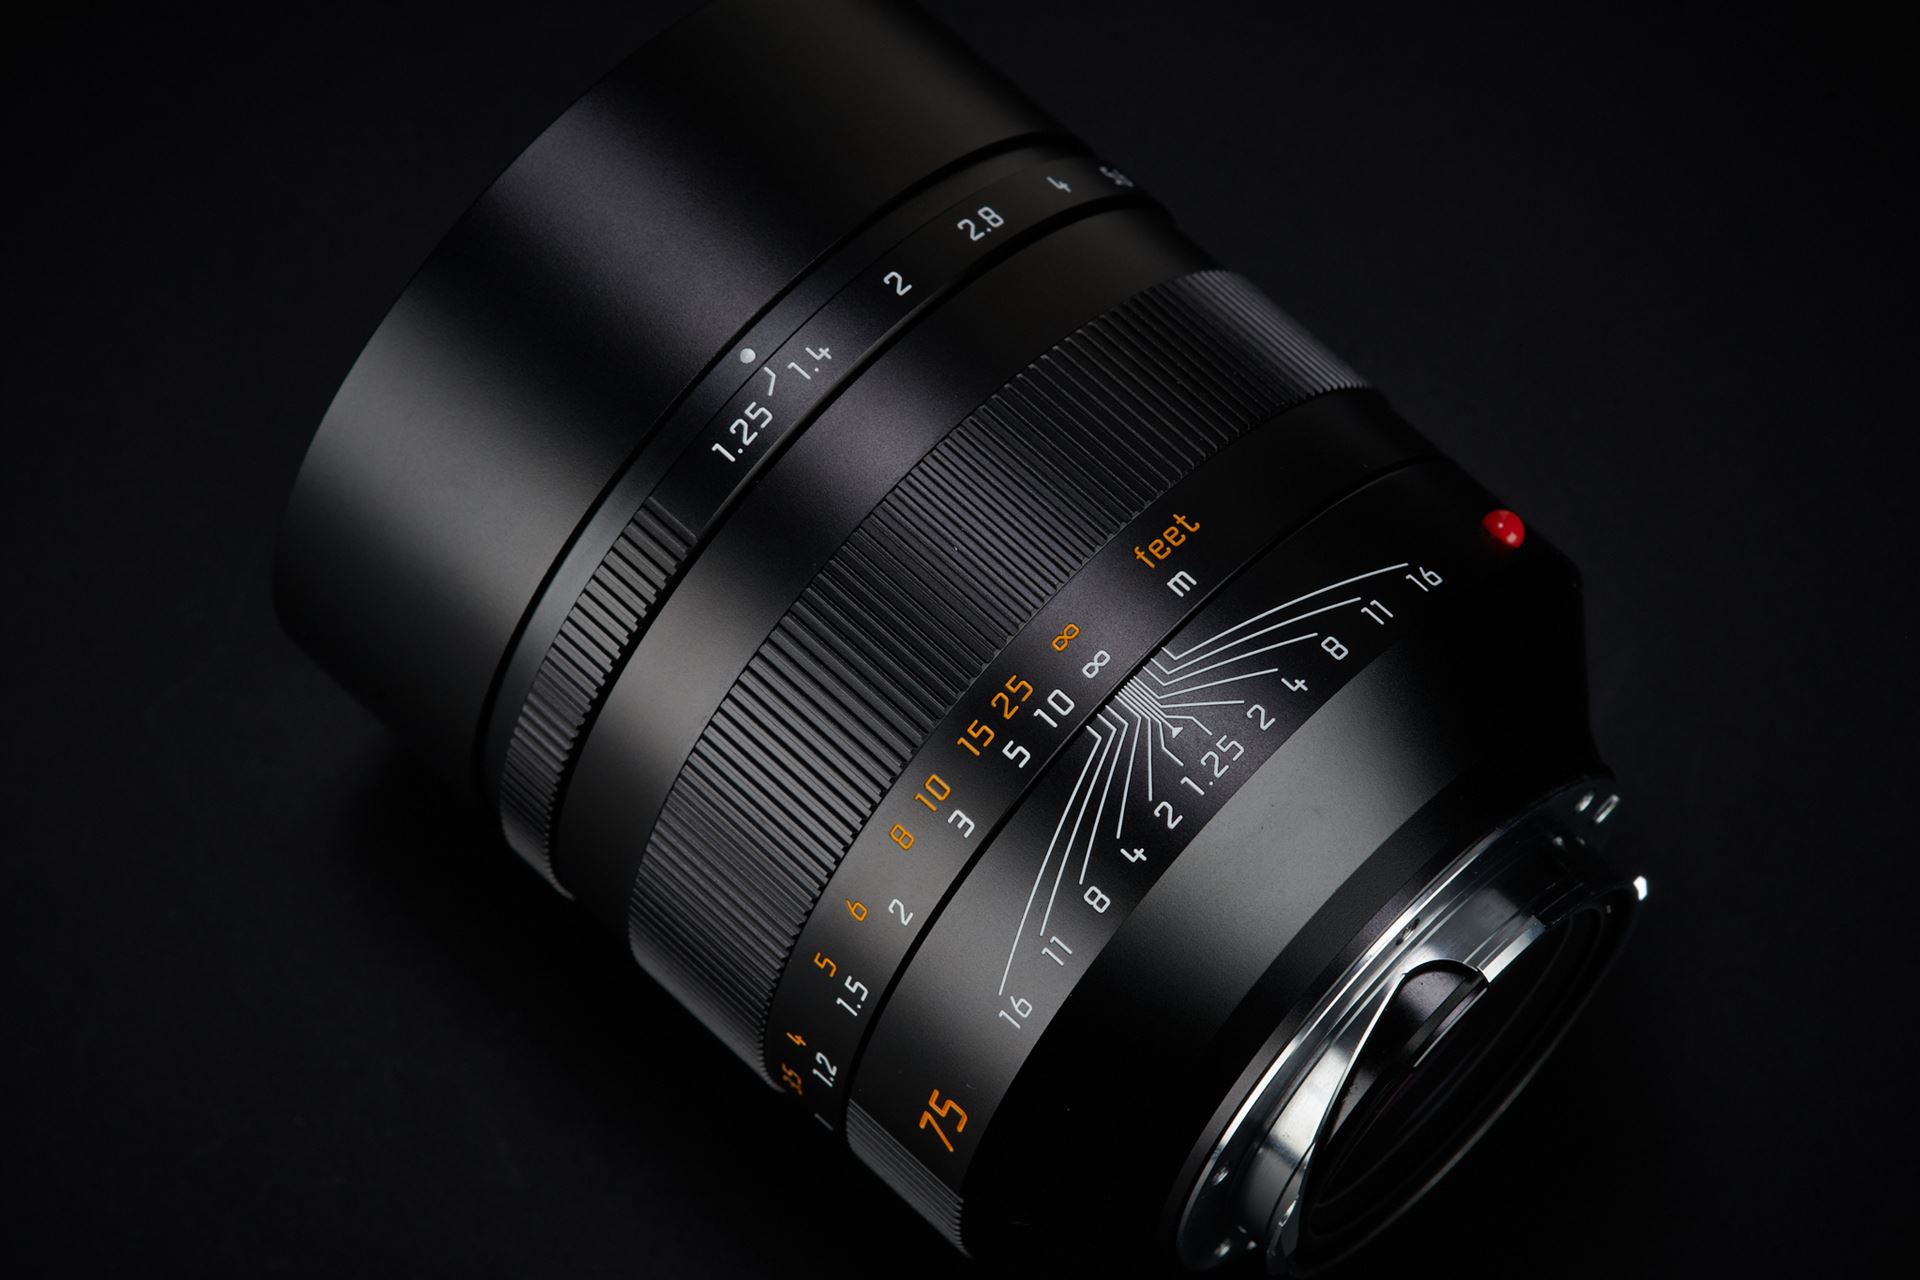 Picture of Leica Noctilux-M 75mm f/1.25 ASPH. Black Anodised